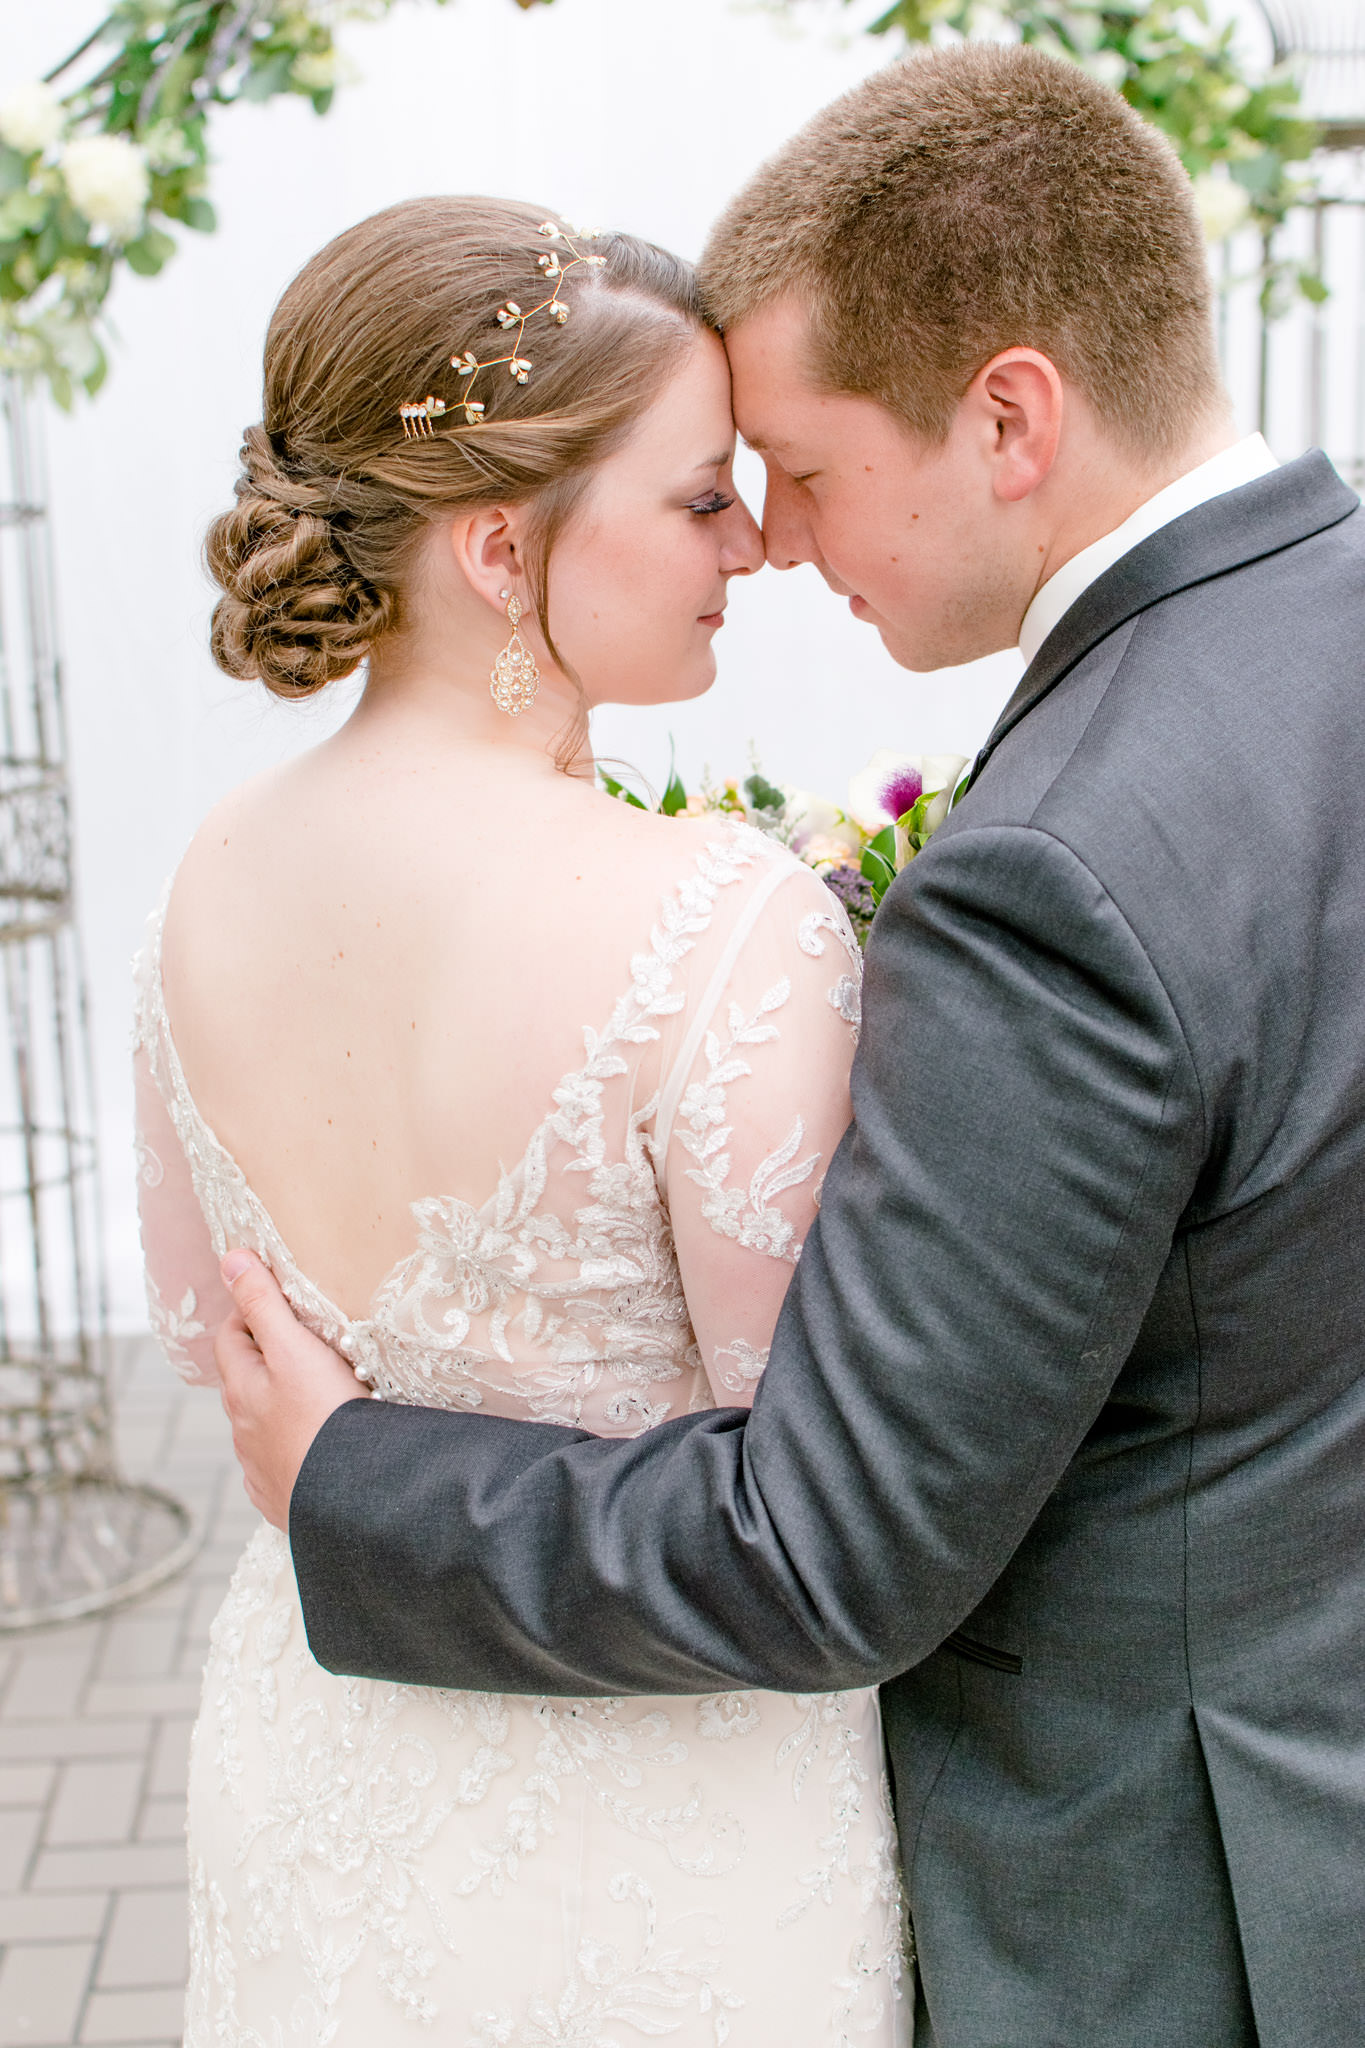 Bride and groom touch foreheads during wedding portraits